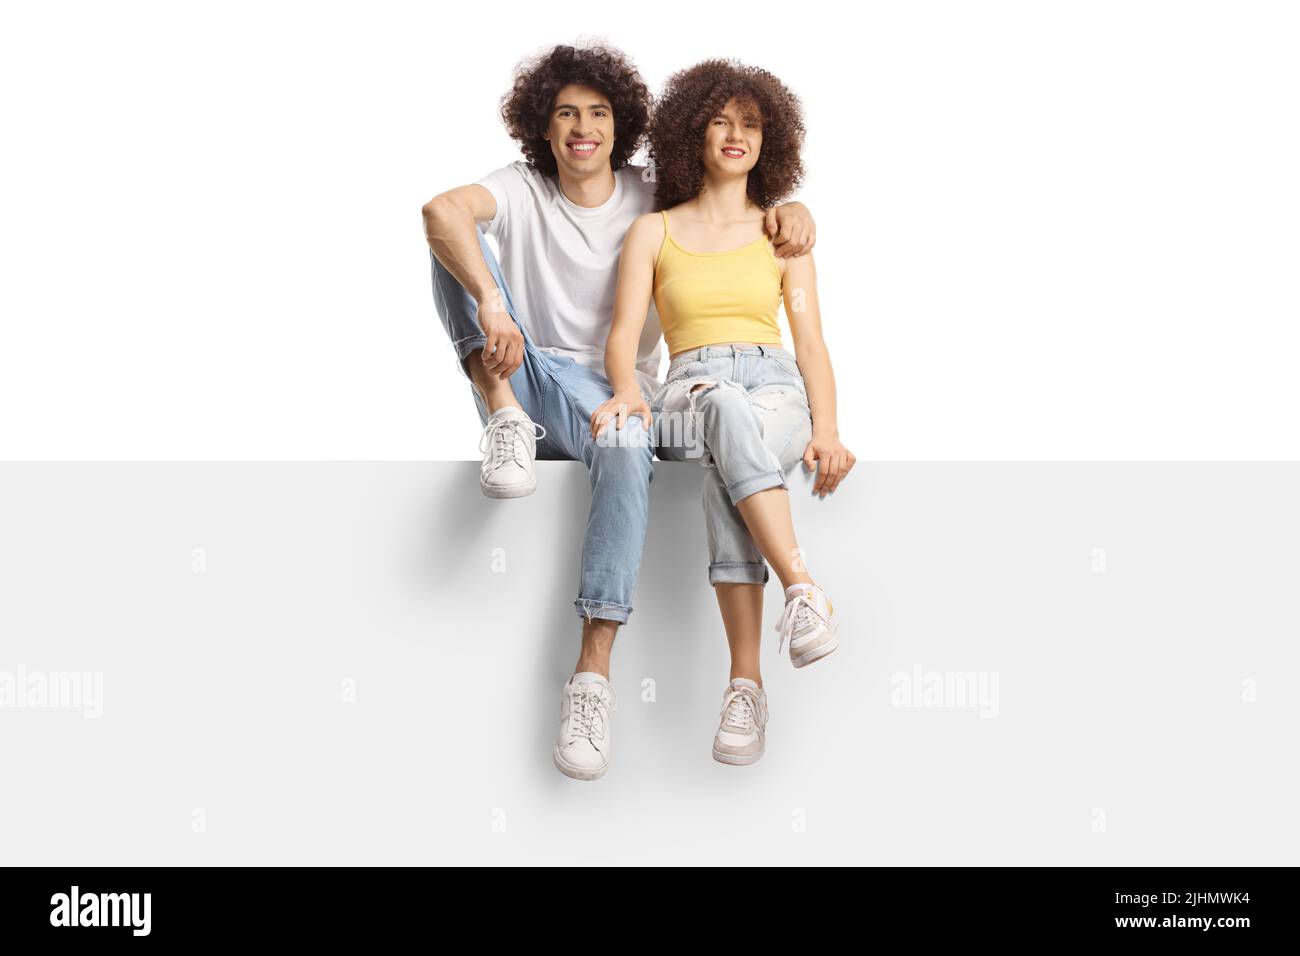 Young man and woman with curly hair smiling sitting on a blank panel isolated on white background Stock Photo